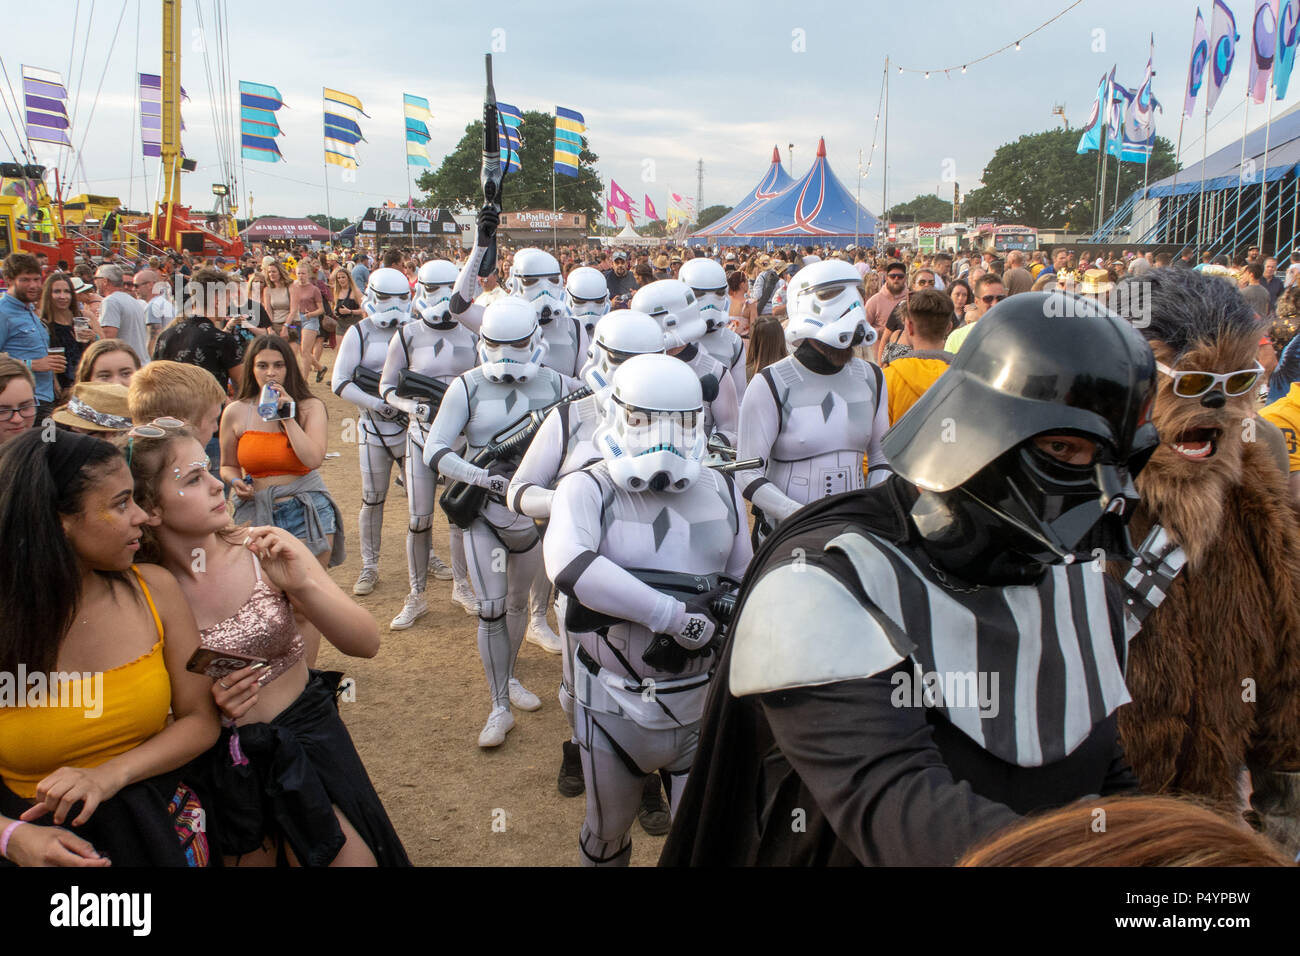 Newport, Isle of Wight, UK. 23rd June, 2018. Festival goers dressed in a Star Wars theme at the 50th Isle of Wight Music Festival, Newport, IOW. Credit: Milton Cogheil/Alamy Live News Stock Photo